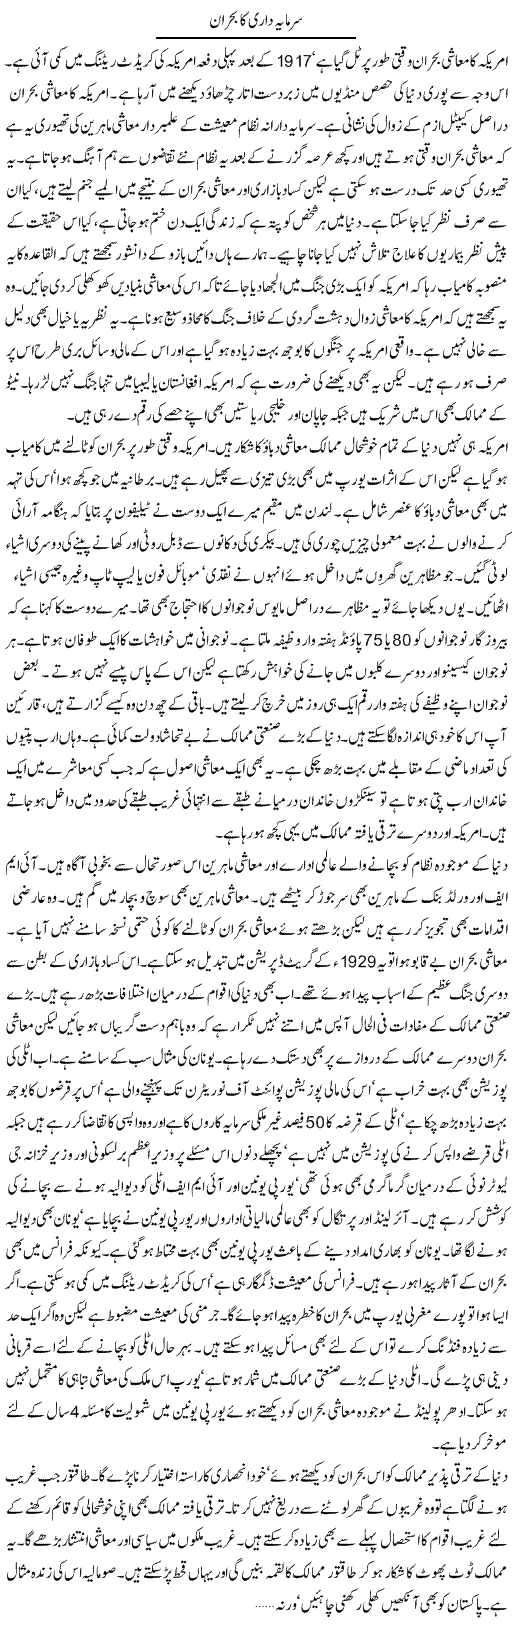 American Recession Express Column Latif Chaudhry 15 August 2011